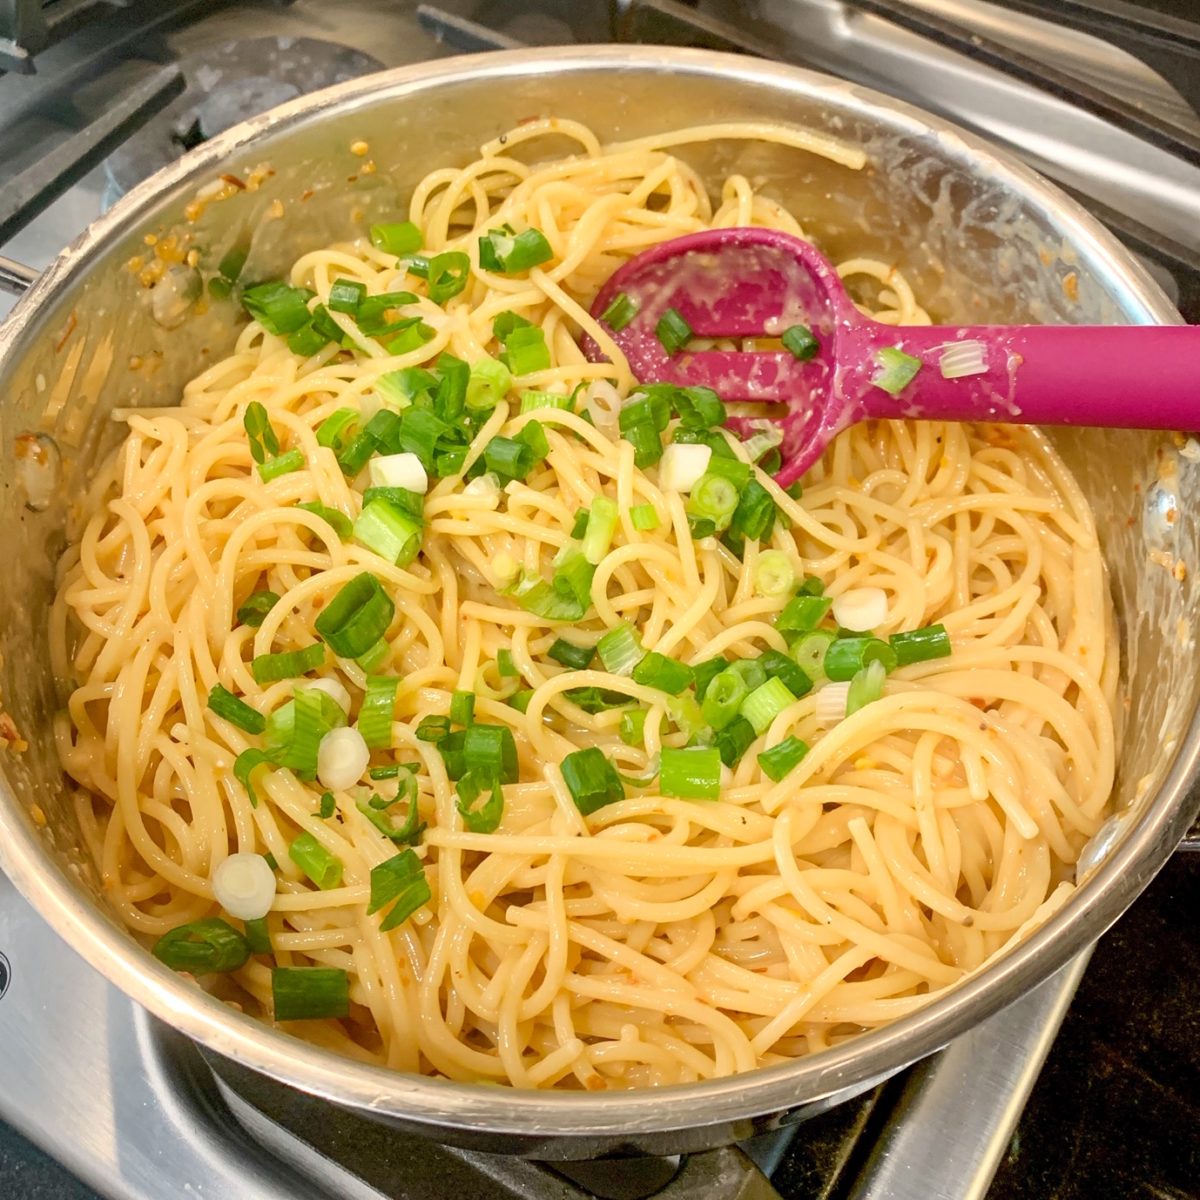 i made chrissy teigen's spicy miso pasta, and it's absolutely as delicious as it sounds